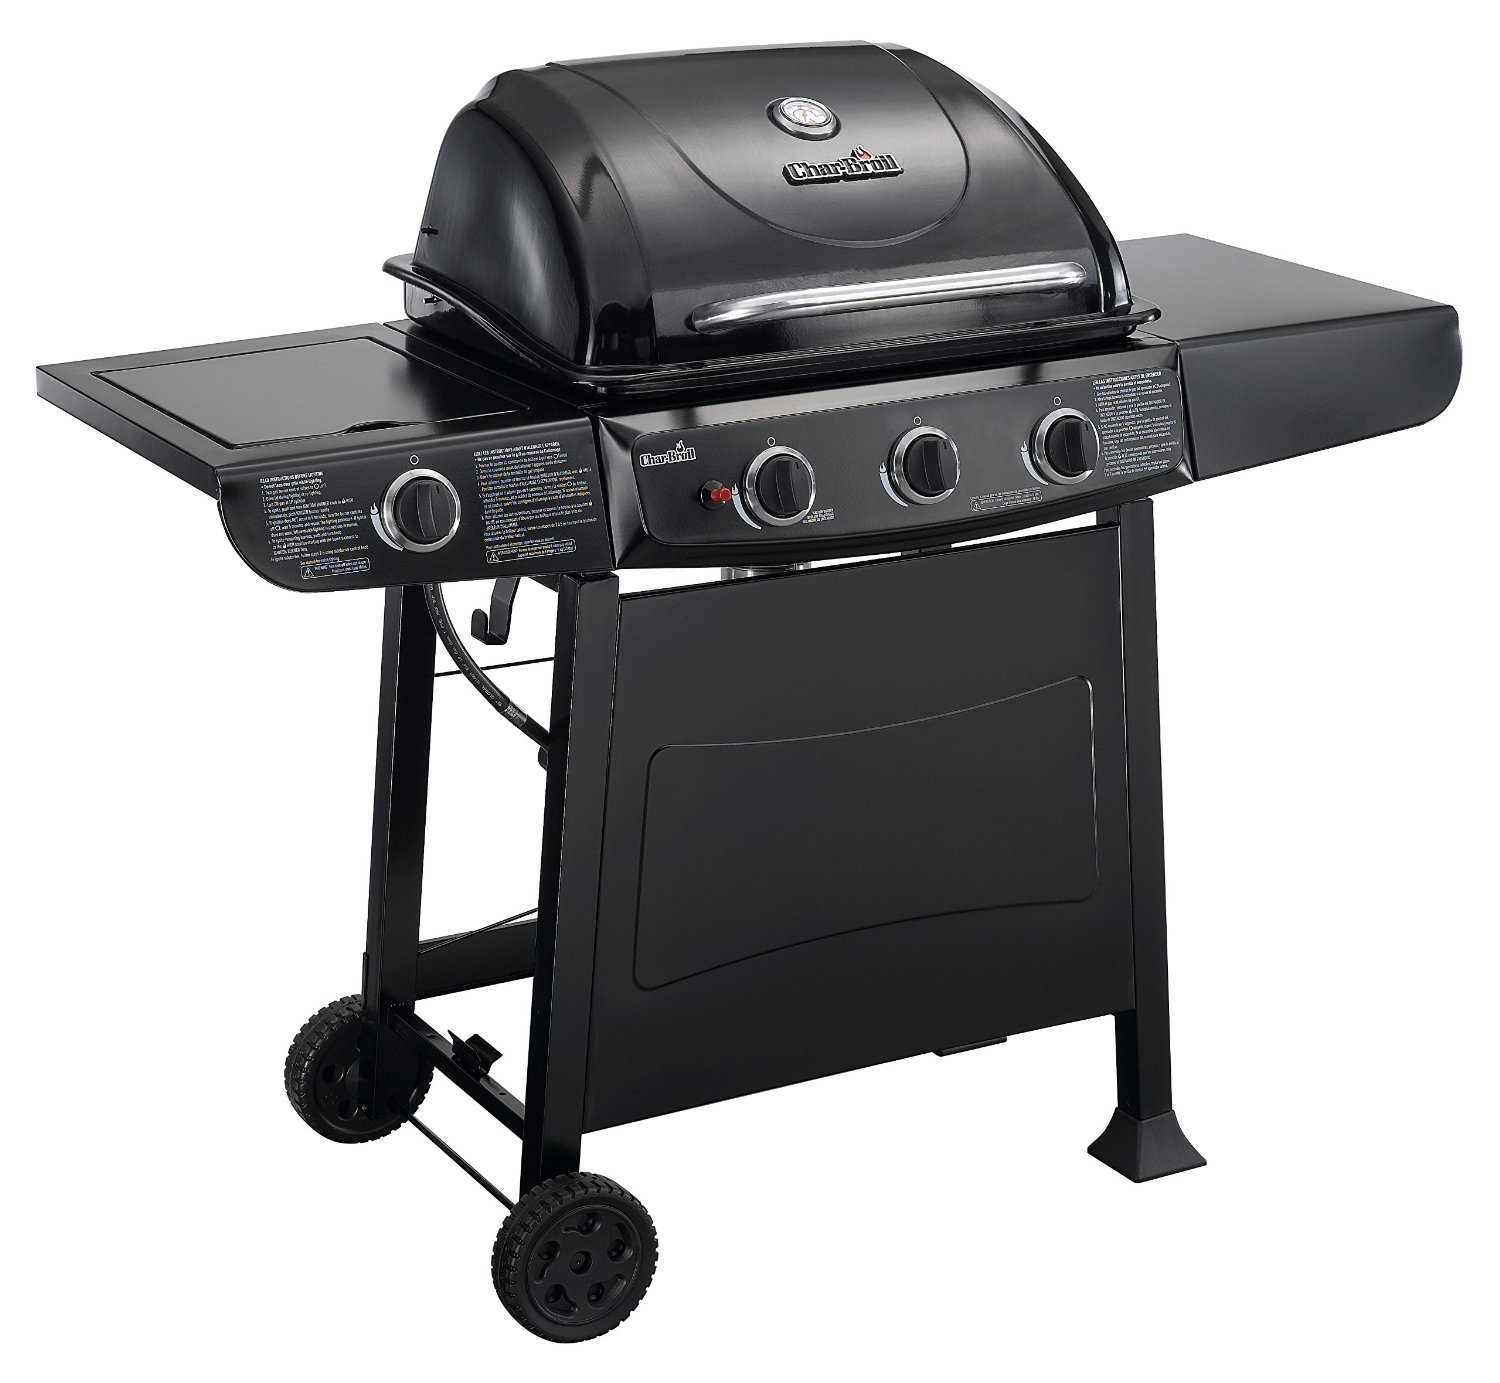 Grill Buying Guide: When and Where to Look for the Best BBQ Deals